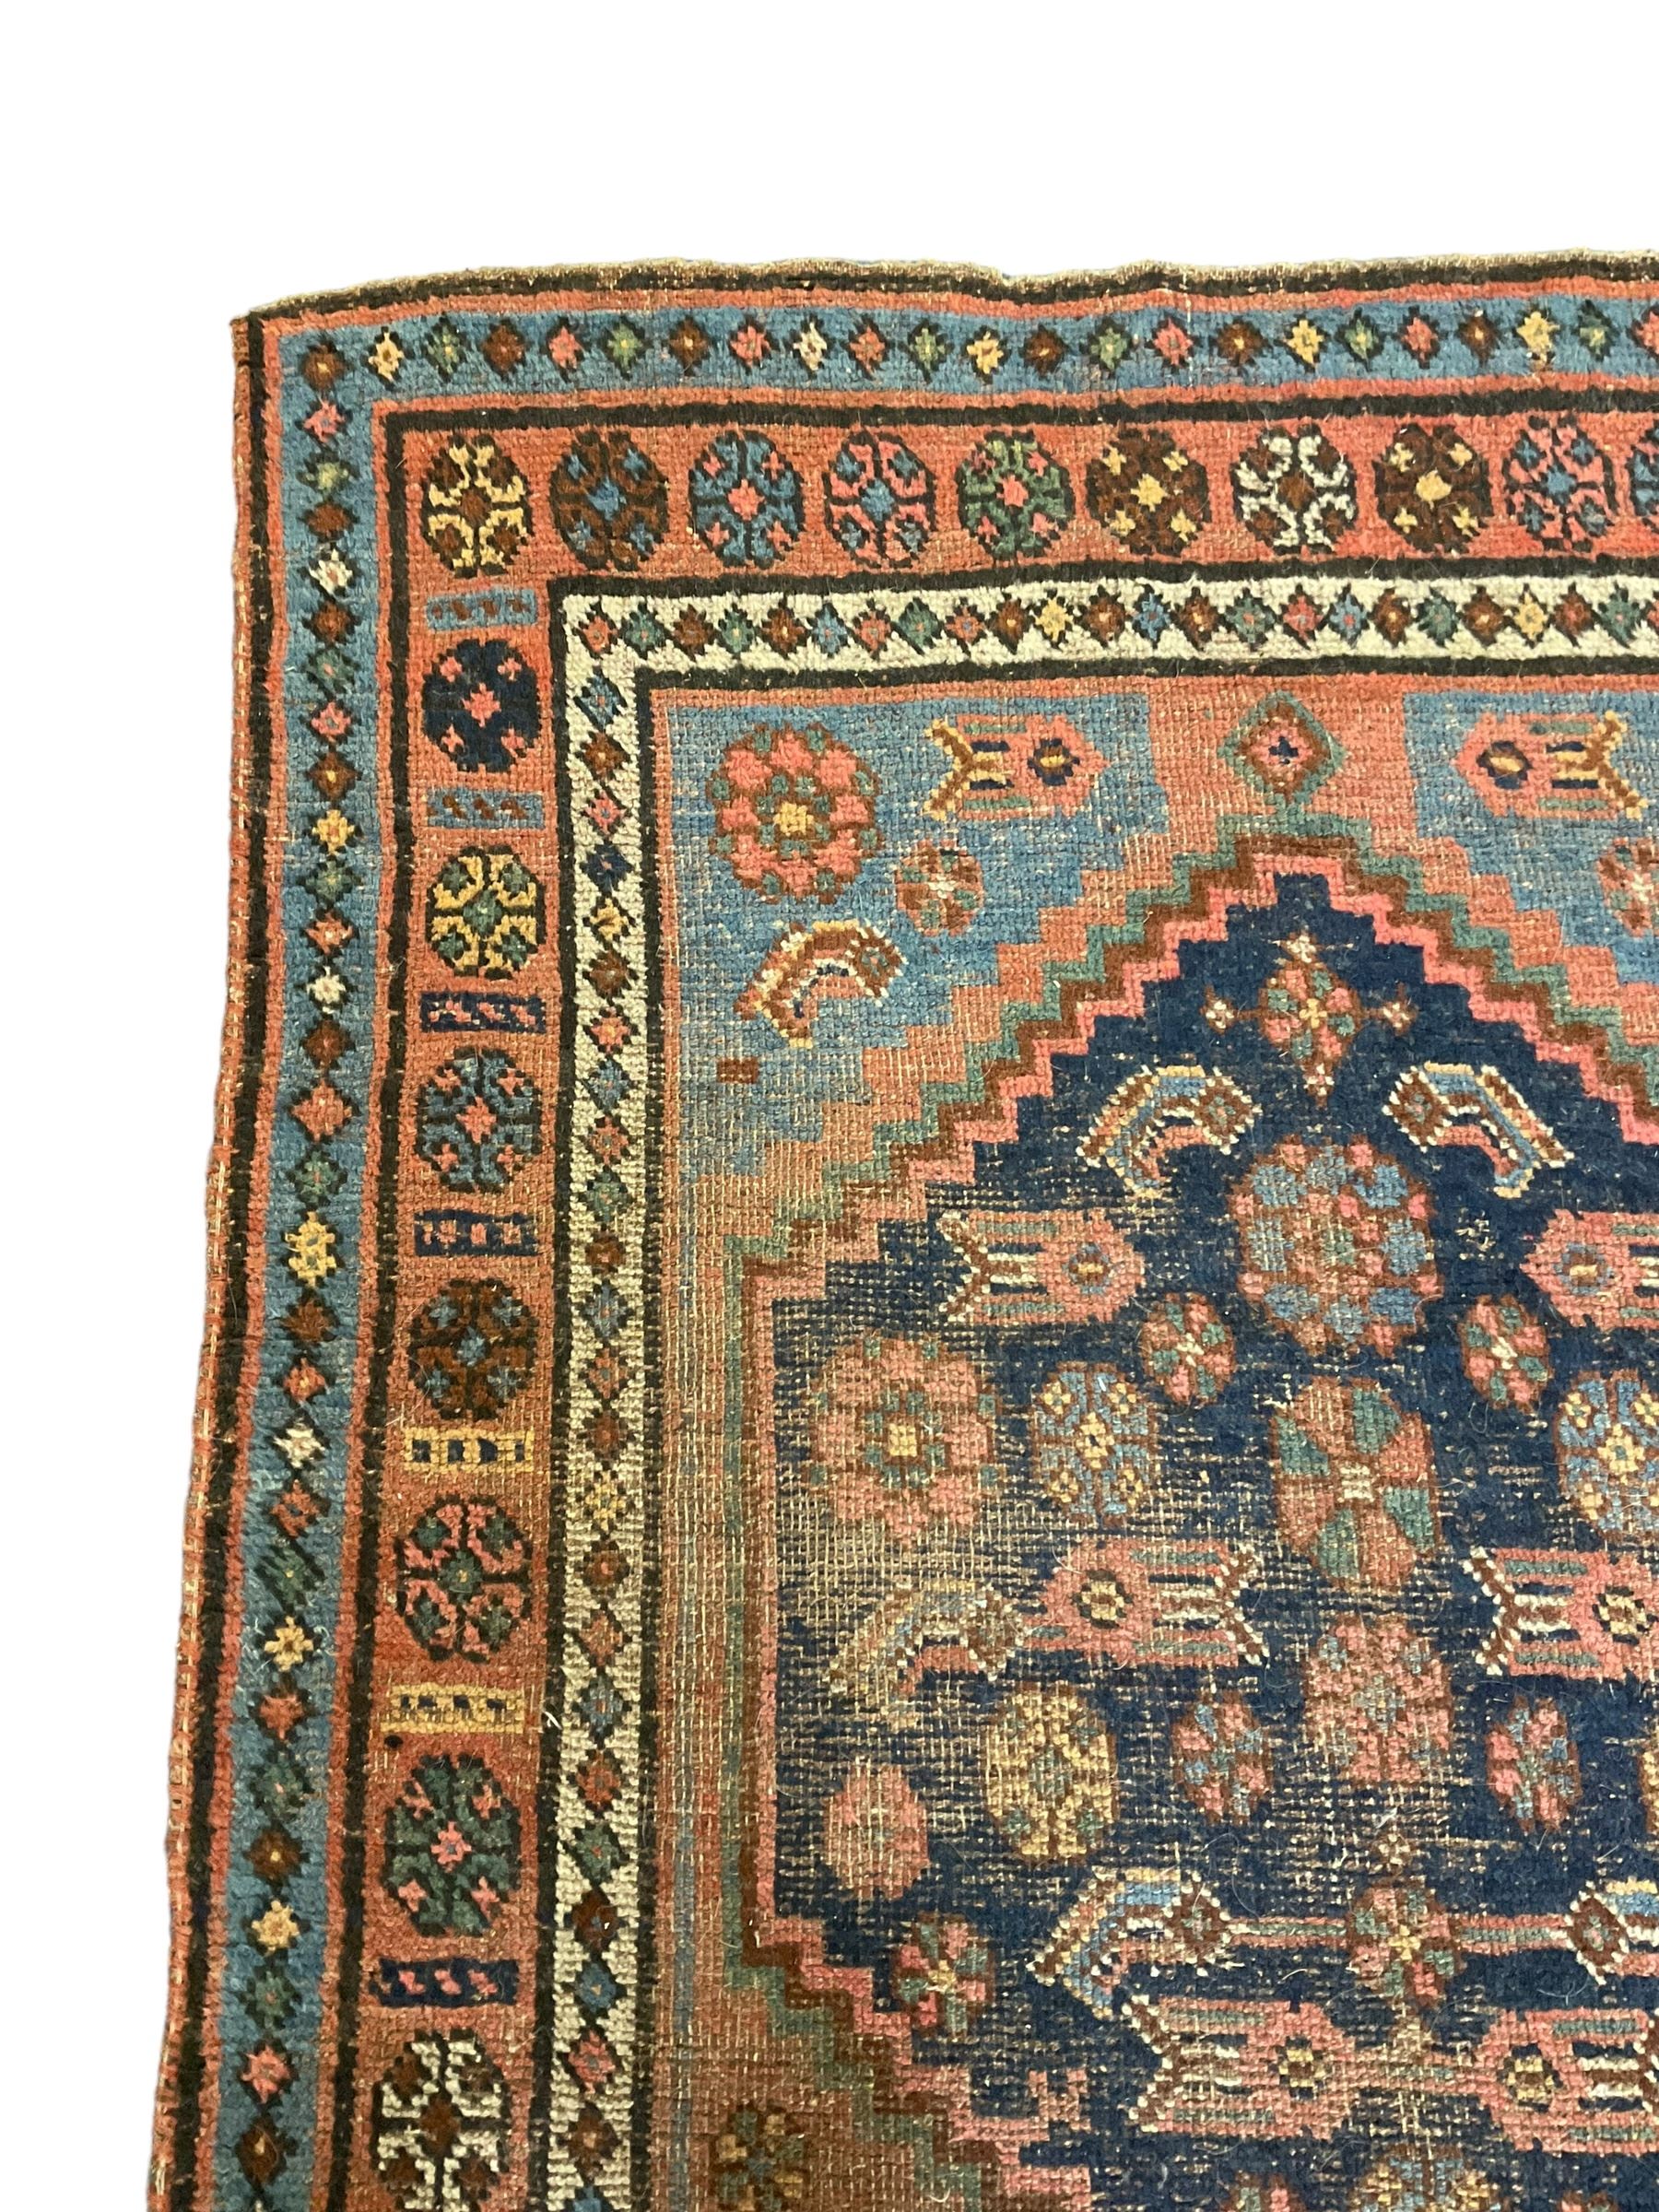 Old Persian rug - Image 2 of 6